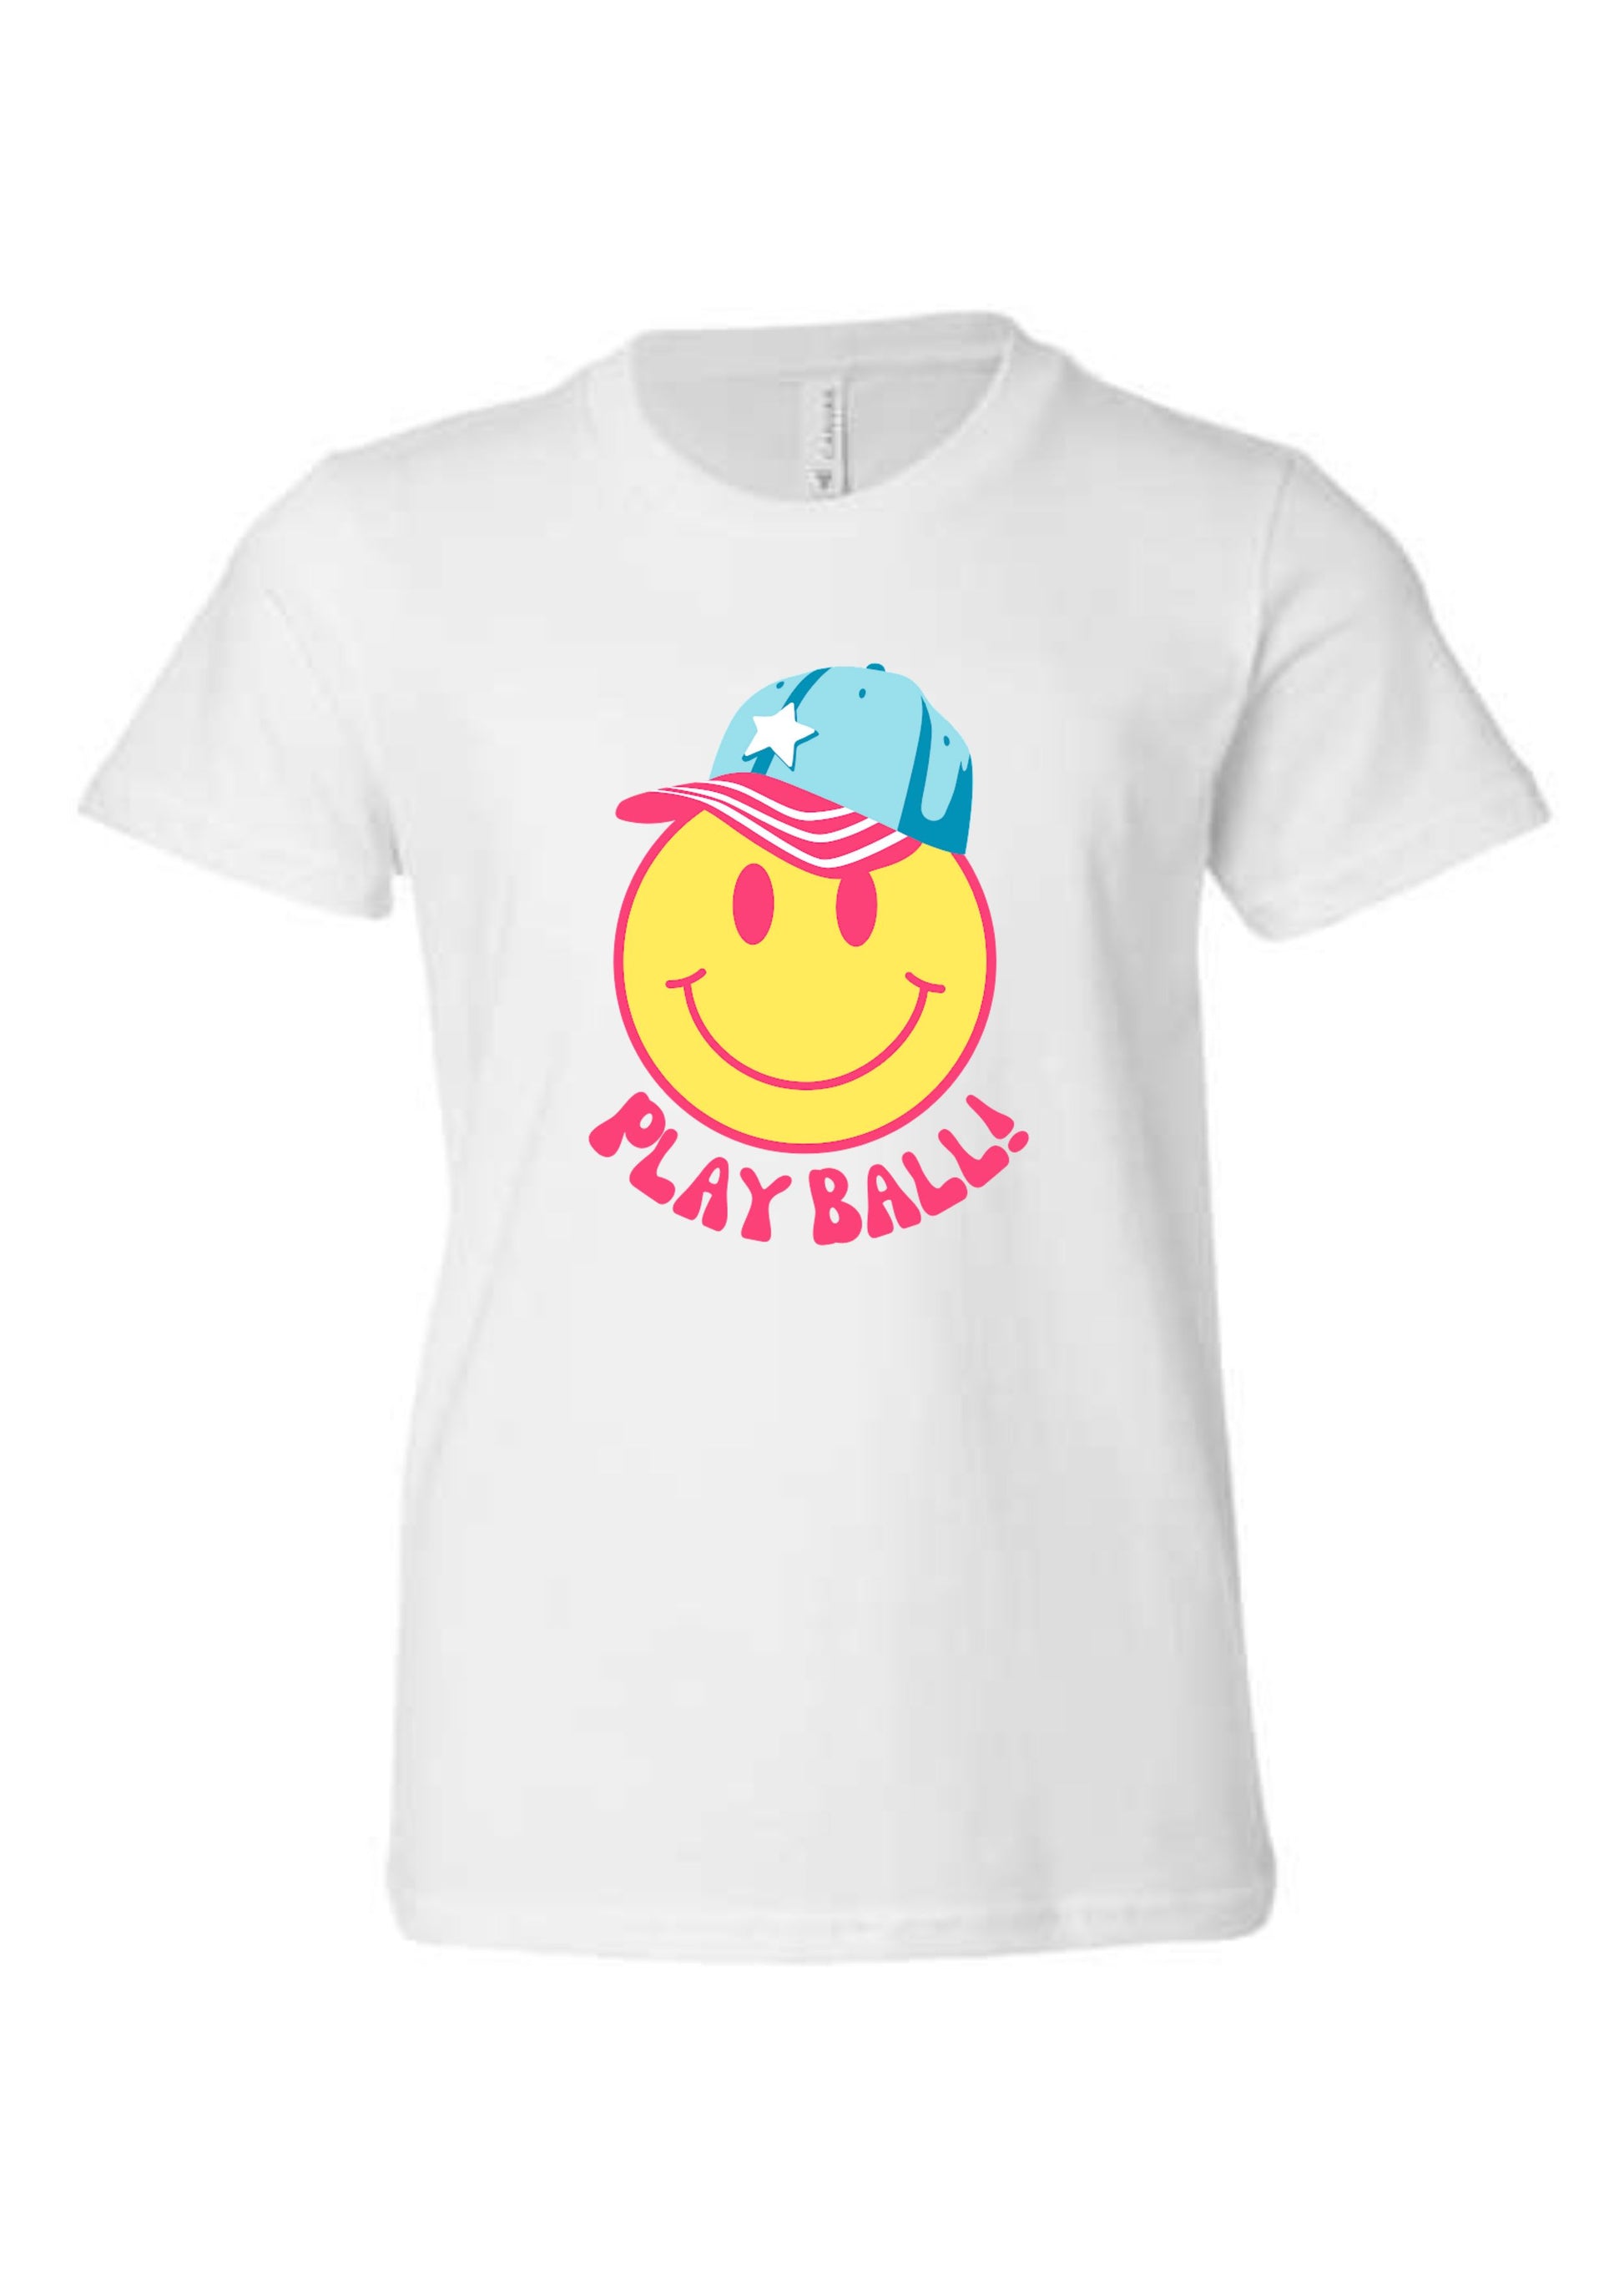 Play Ball Happy | Tee | Kids-Kids Tees-Sister Shirts-Sister Shirts, Cute & Custom Tees for Mama & Littles in Trussville, Alabama.